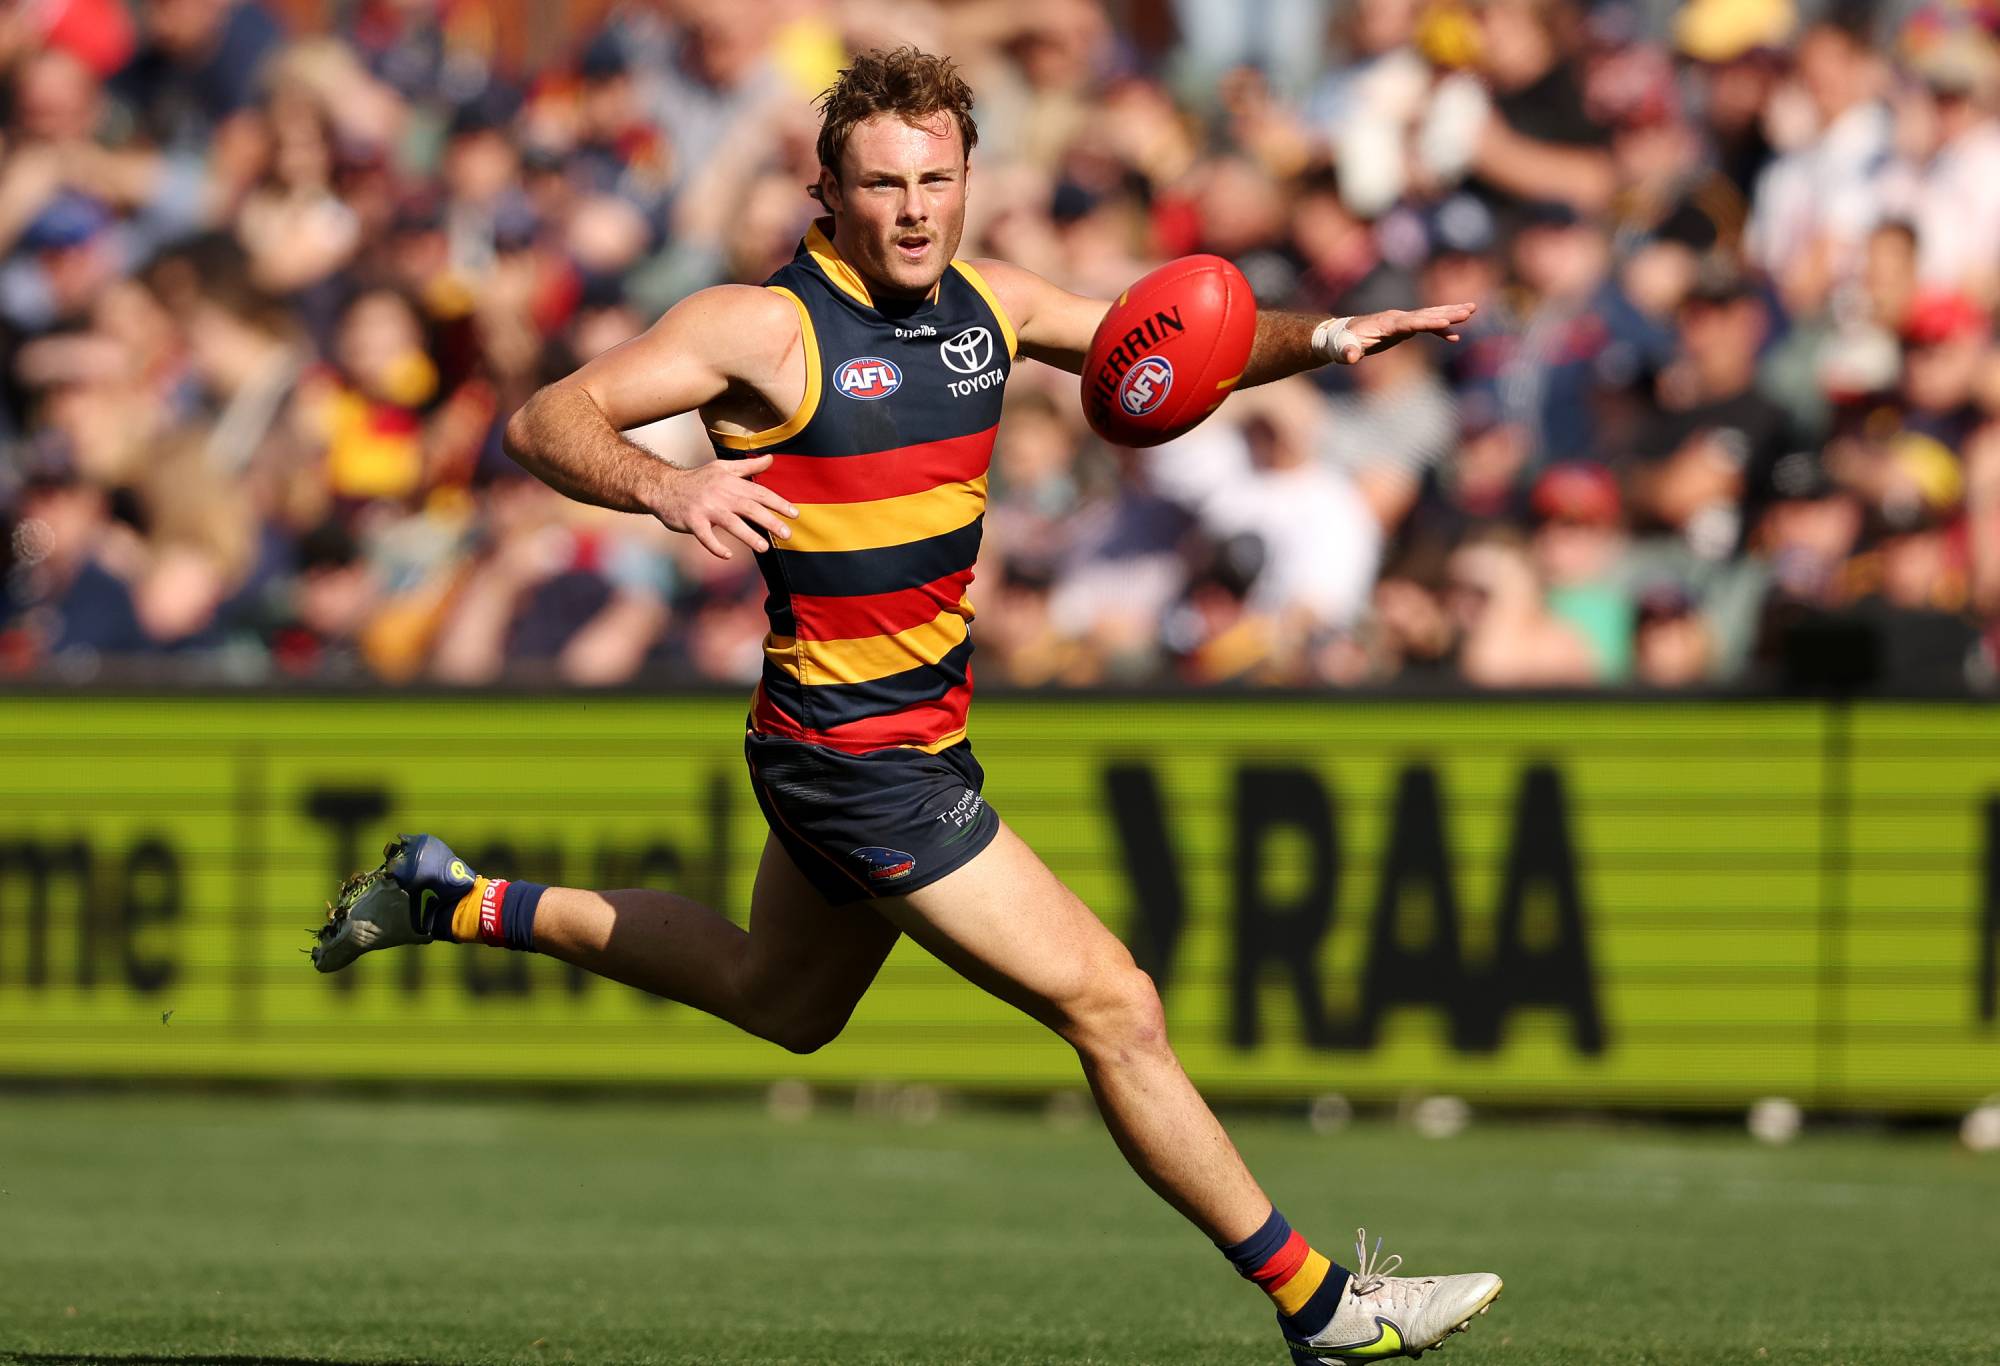  Luke Pedlar of the Crows during the 2023 AFL Round 09 match between the Adelaide Crows and the St Kilda Saints at Adelaide Oval on May 14, 2023 in Adelaide, Australia. (Photo by Sarah Reed/AFL Photos via Getty Images)